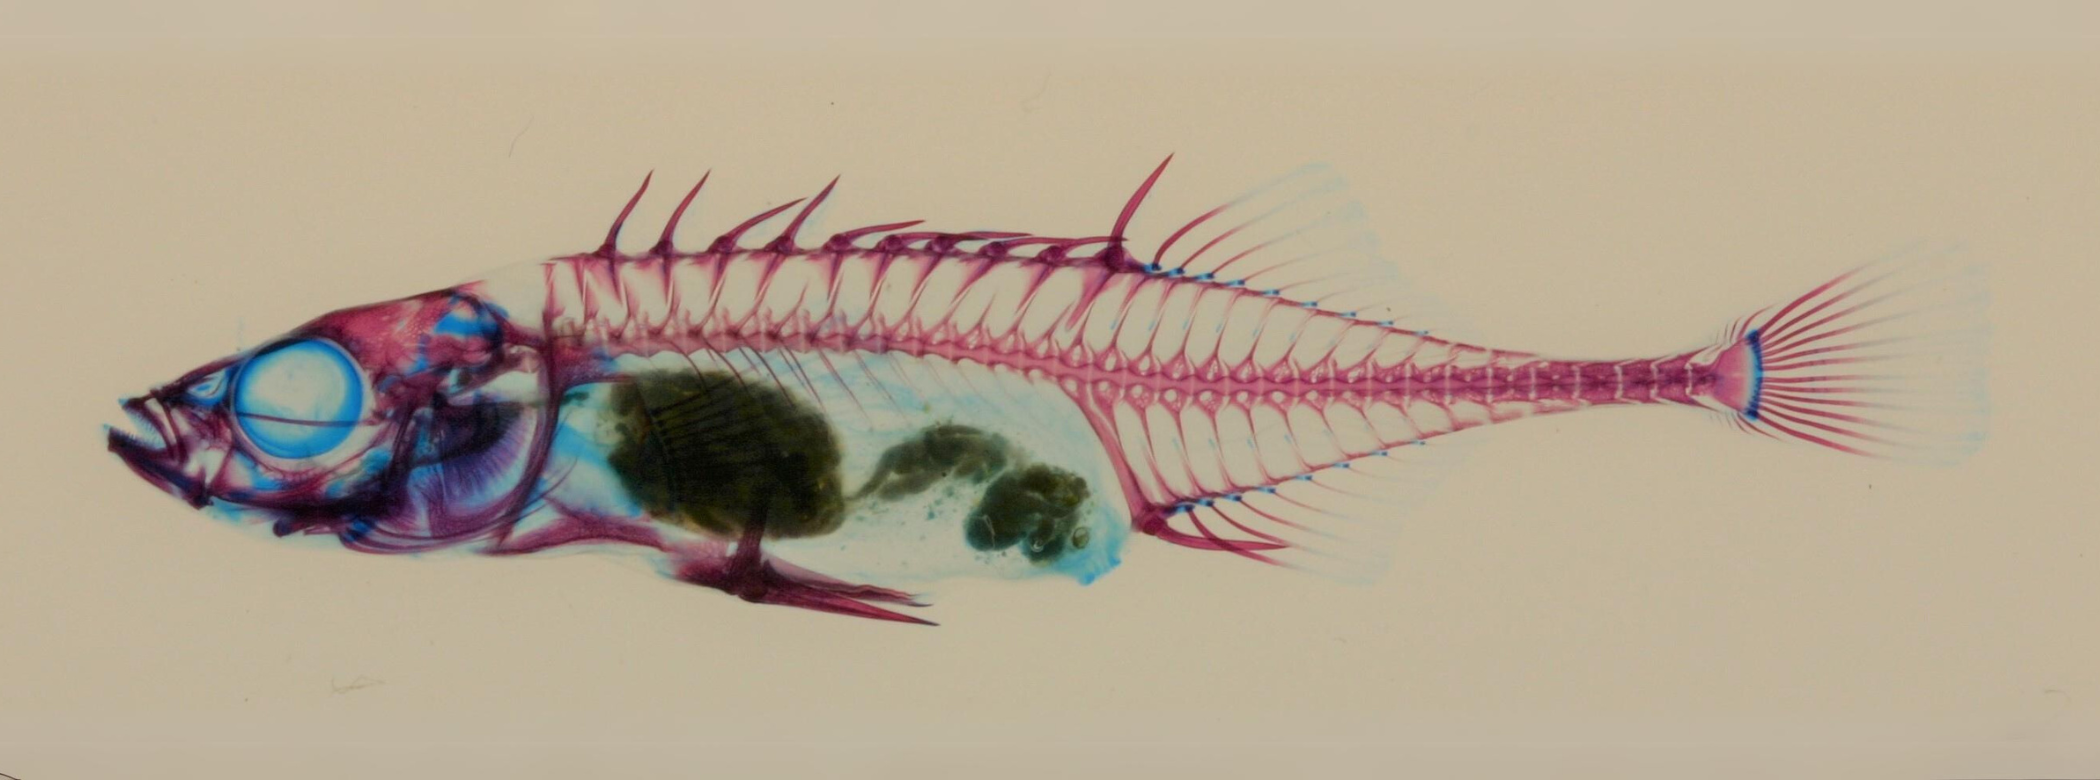 Small, slim fish specially prepared to make soft tissues (skin and muscle) transparent and to stain bones stained red and cartilage blue. Dorsal, pelvic, and anal fins have robust, pointed spines.